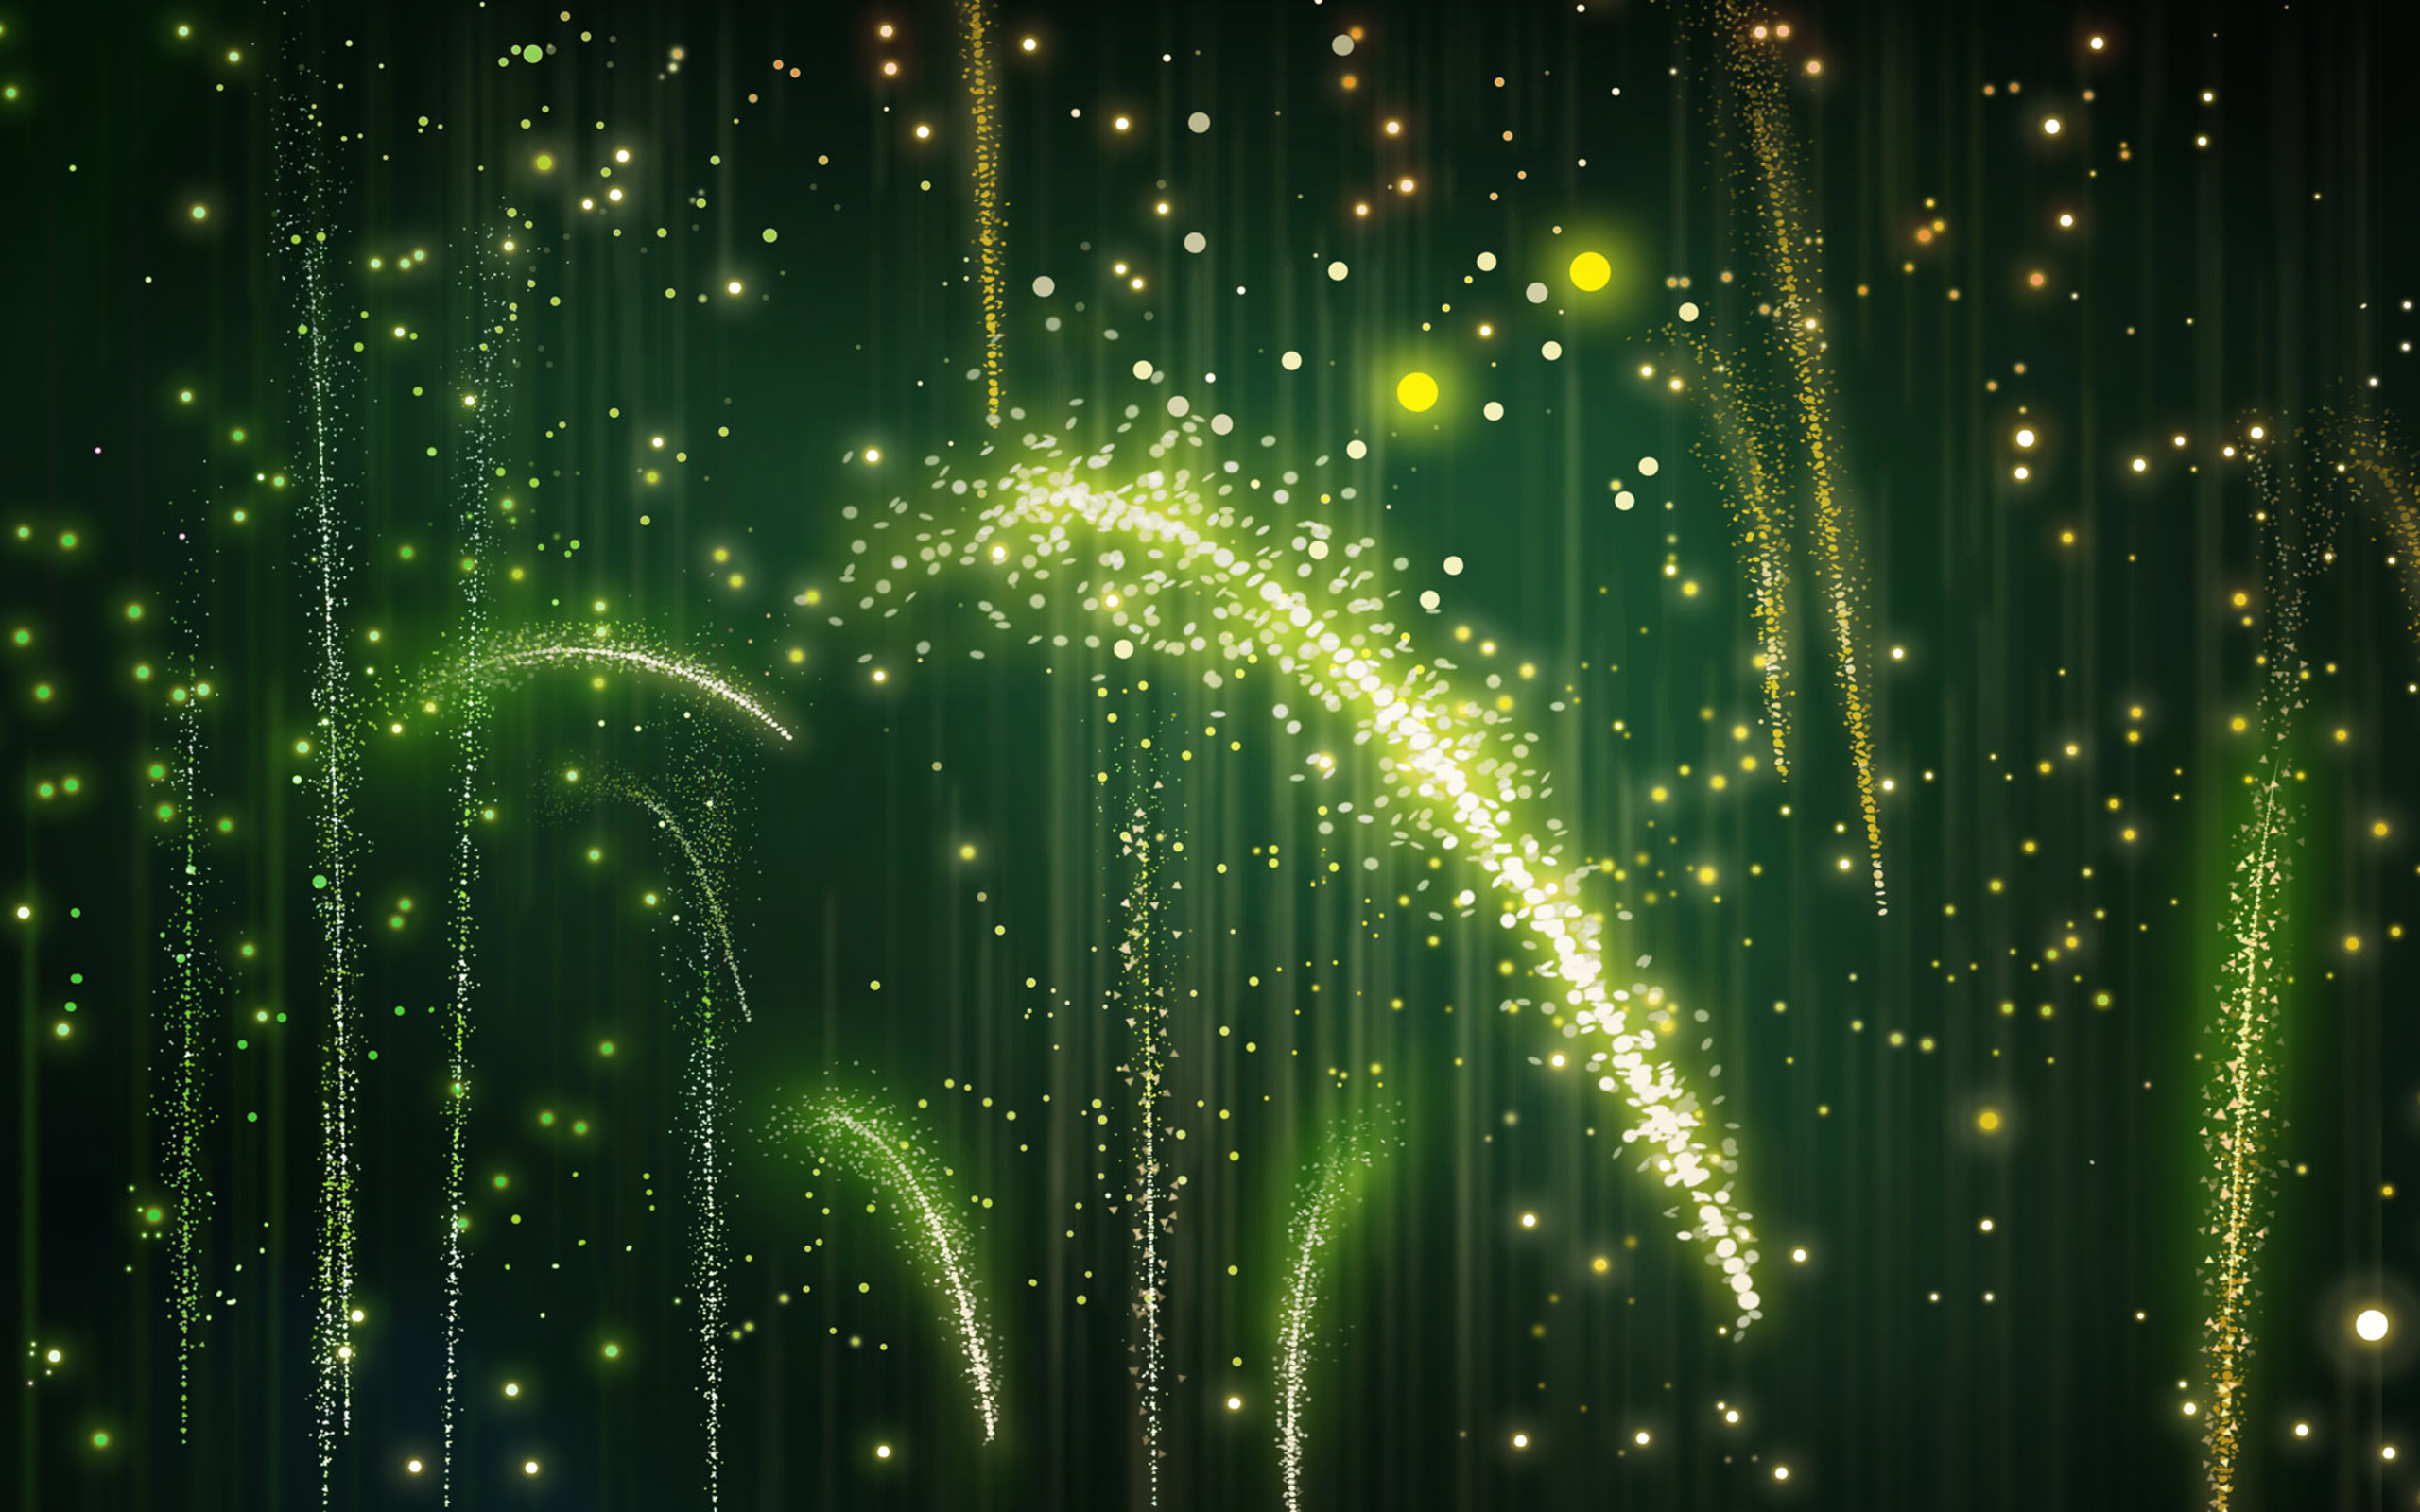 Abstract Green HD Wallpaper | Background Image